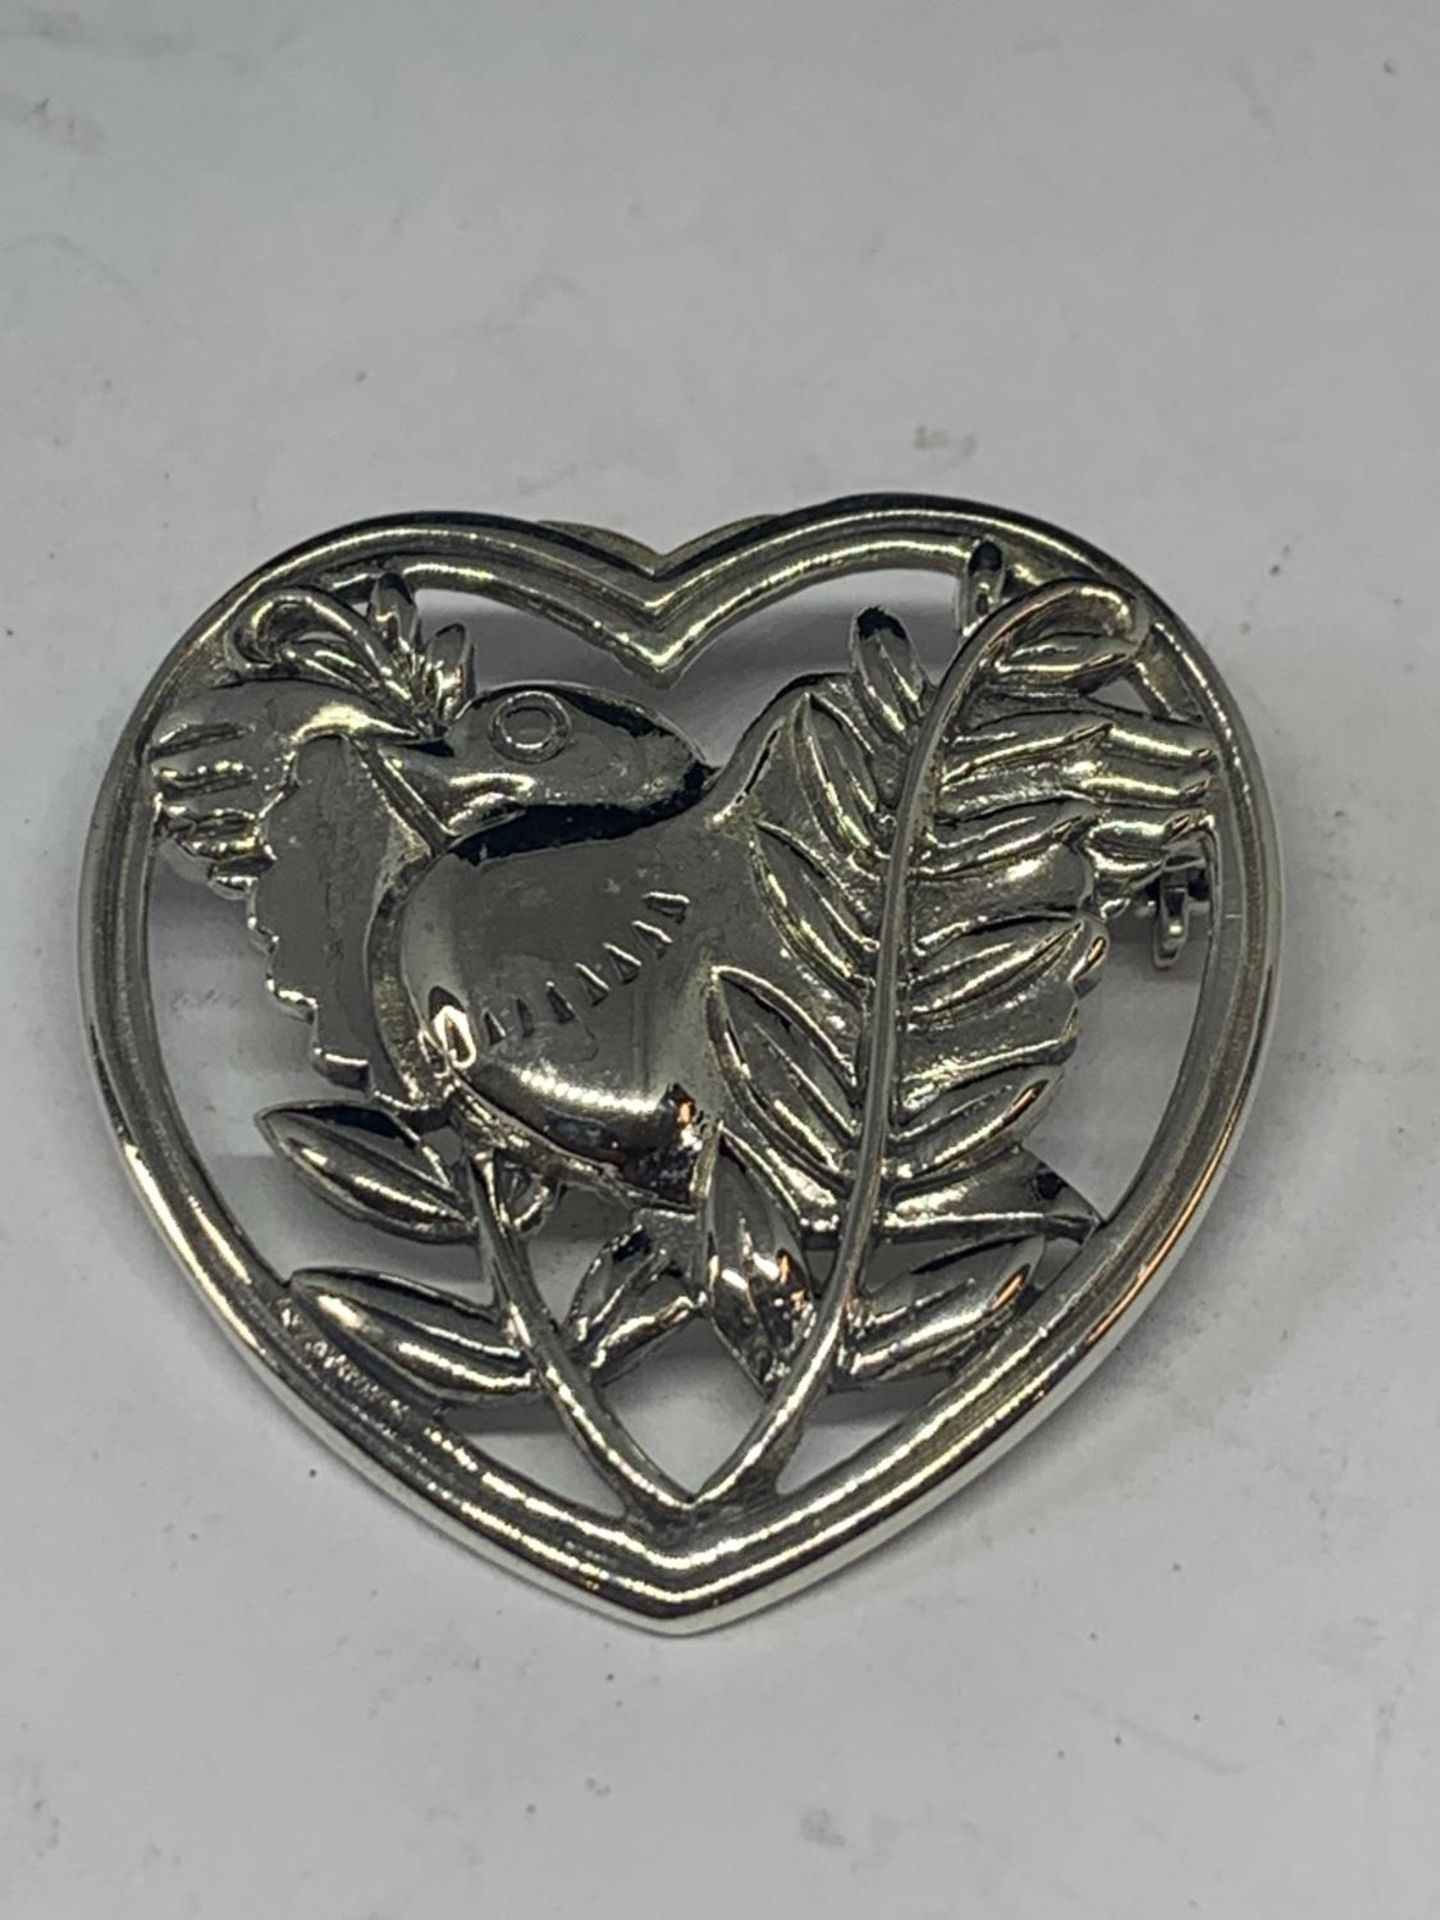 A MARKED DENMARK SILVER HEART SHAPED BROOCH WITH BIRD AND LEAF DESIGN